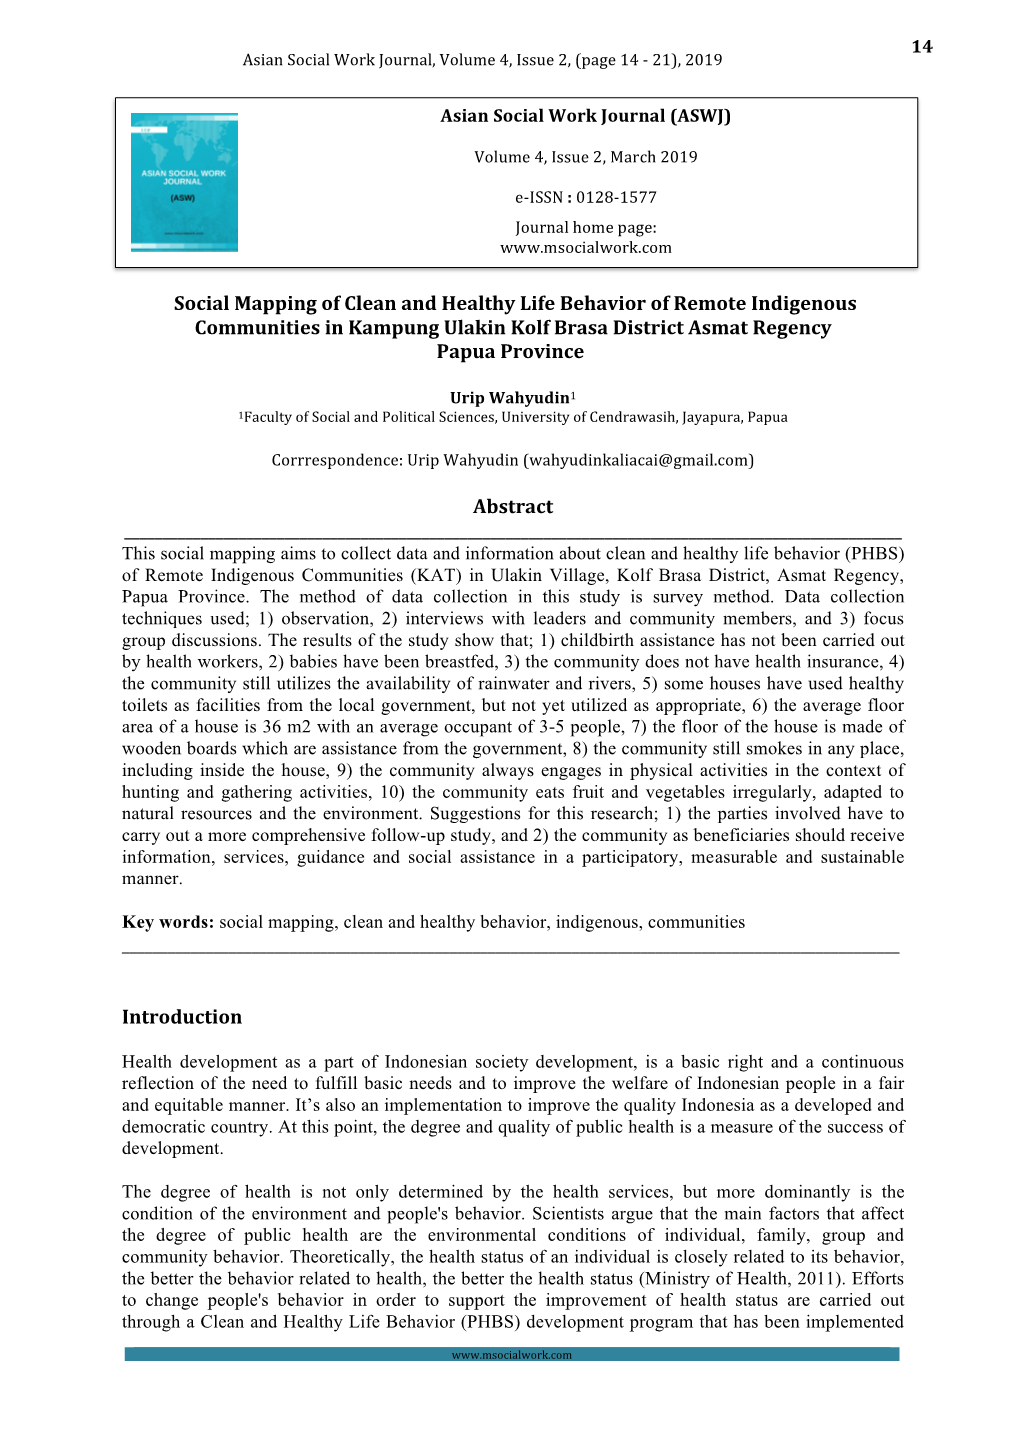 Social Mapping of Clean and Healthy Life Behavior of Remote Indigenous Communities in Kampung Ulakin Kolf Brasa District Asmat Regency Papua Province